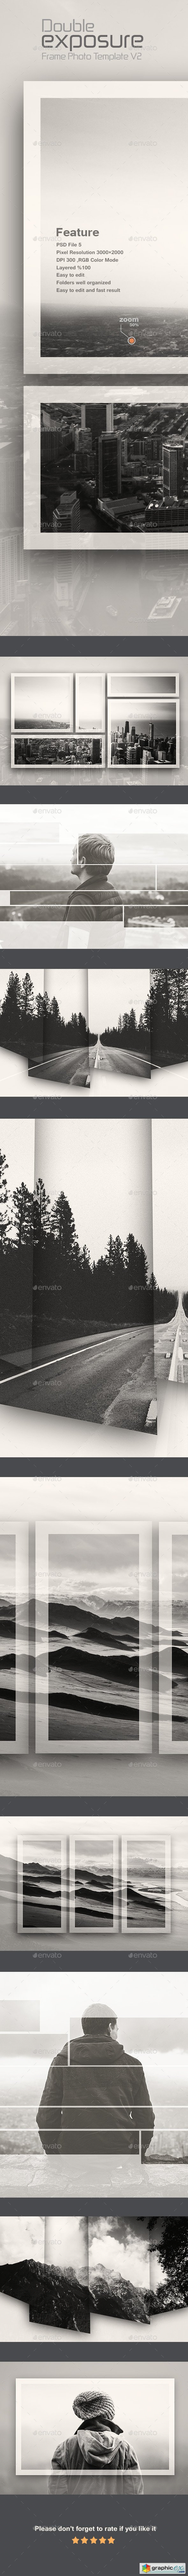 Double Exposure Frame Photo Template v2